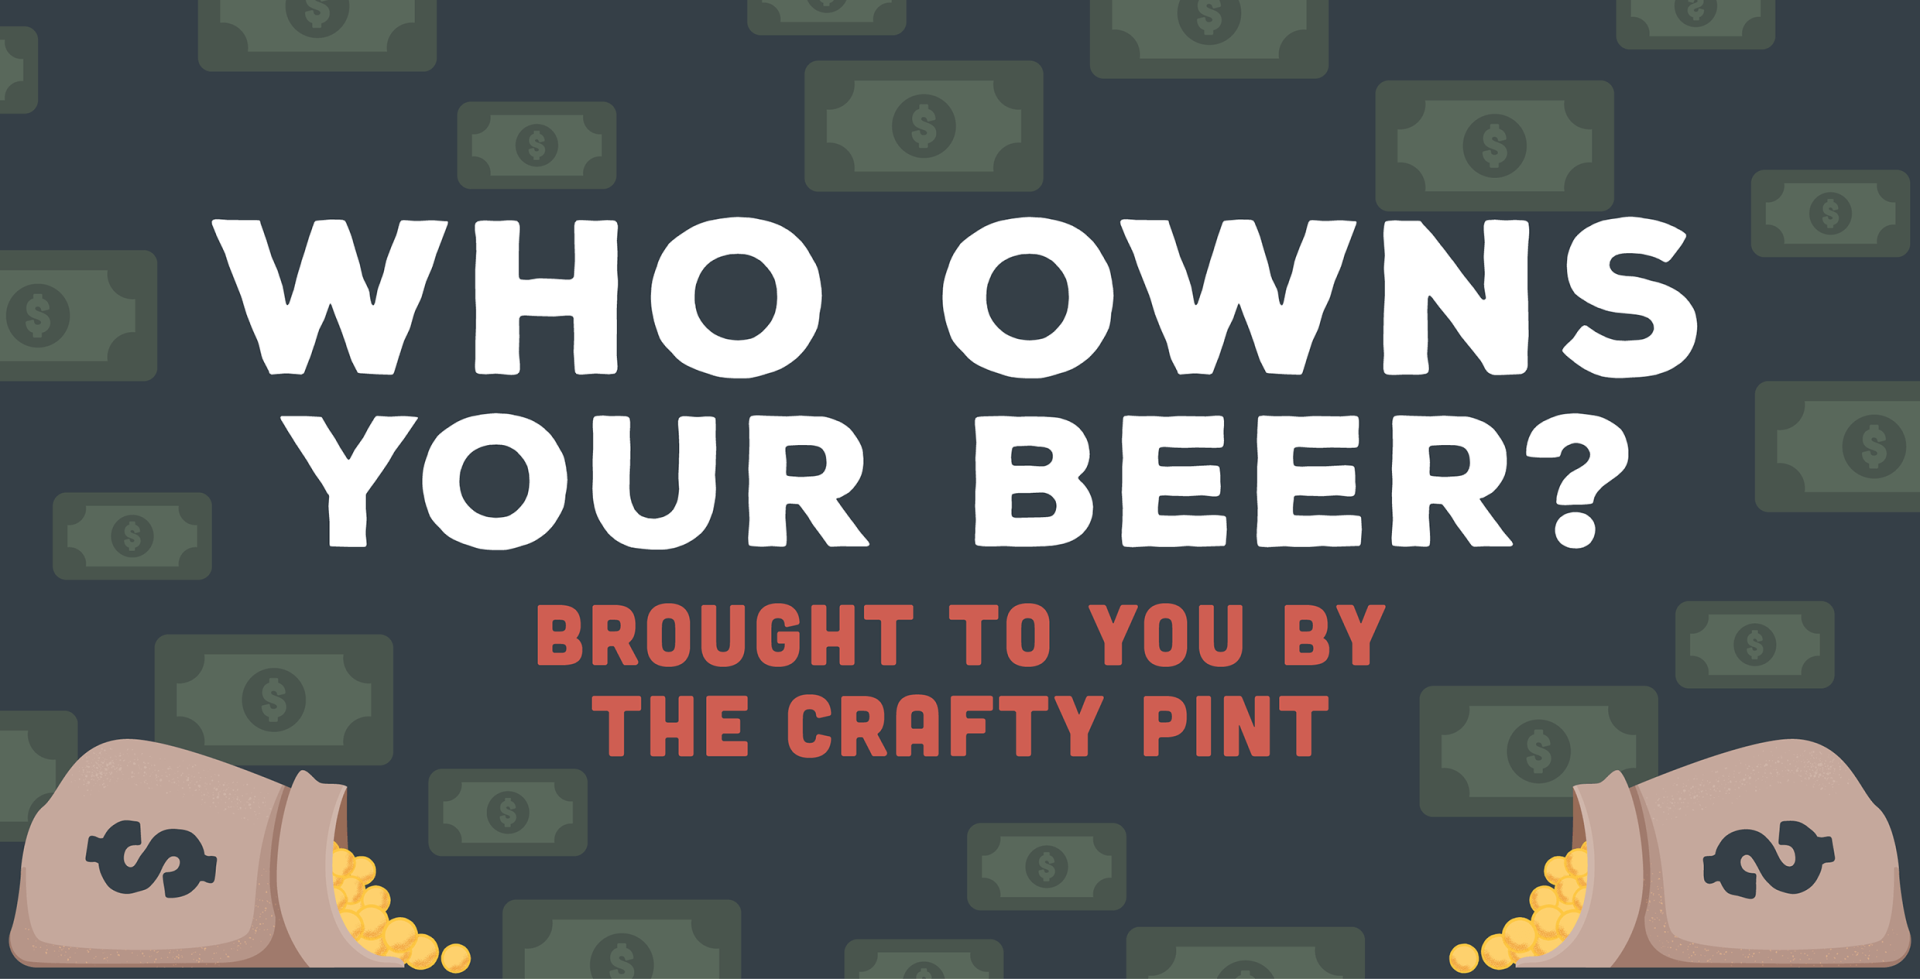 Who owns your beer?